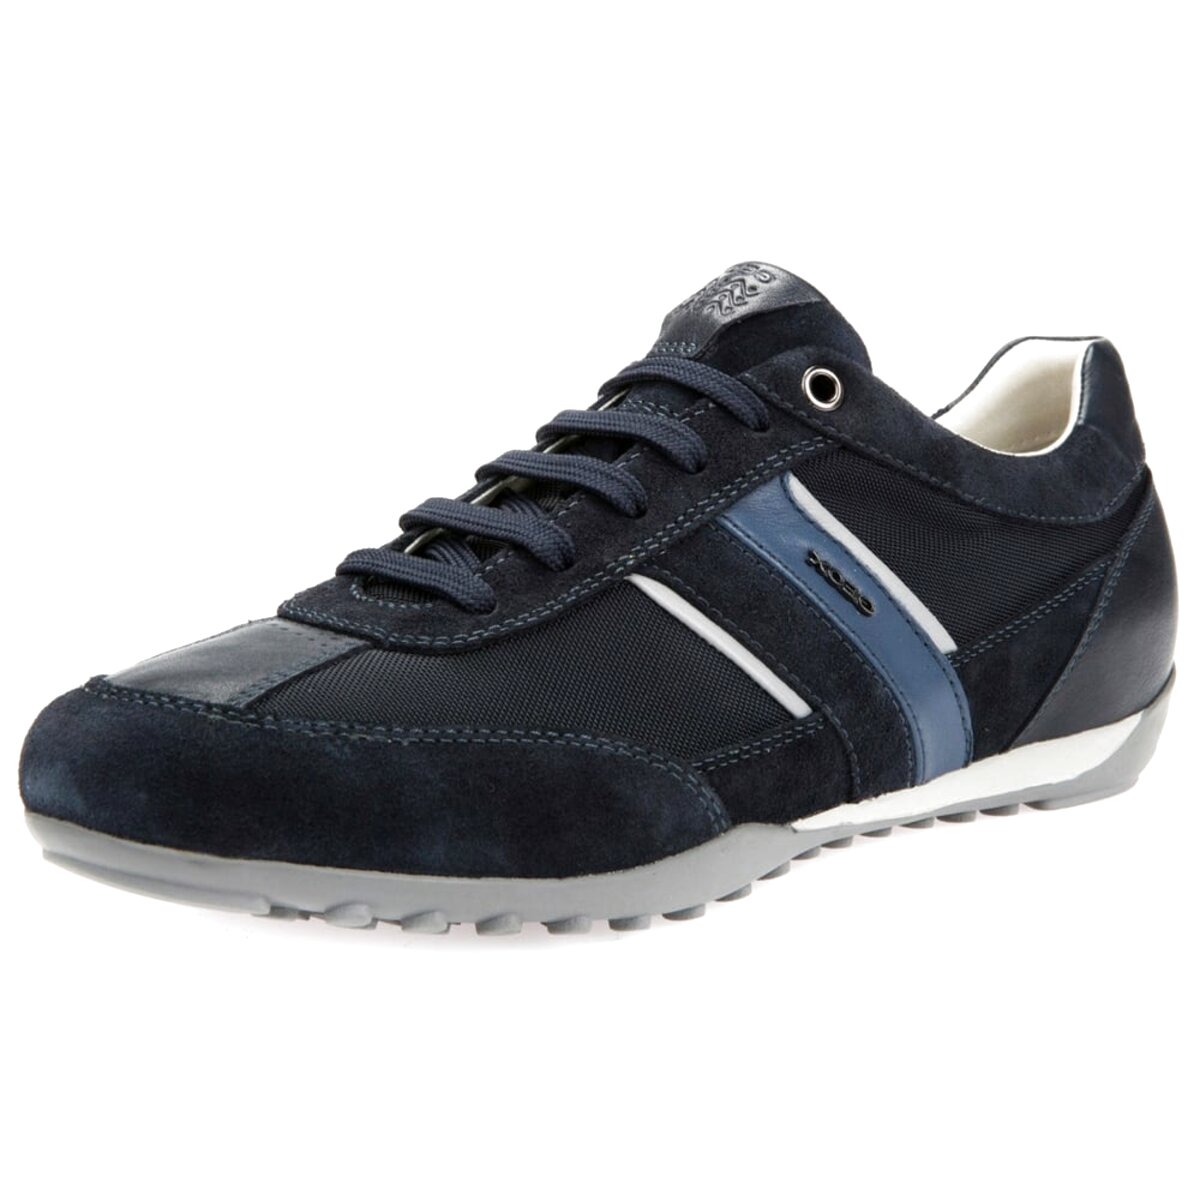 Mens Geox Trainers for sale in UK | View 45 bargains